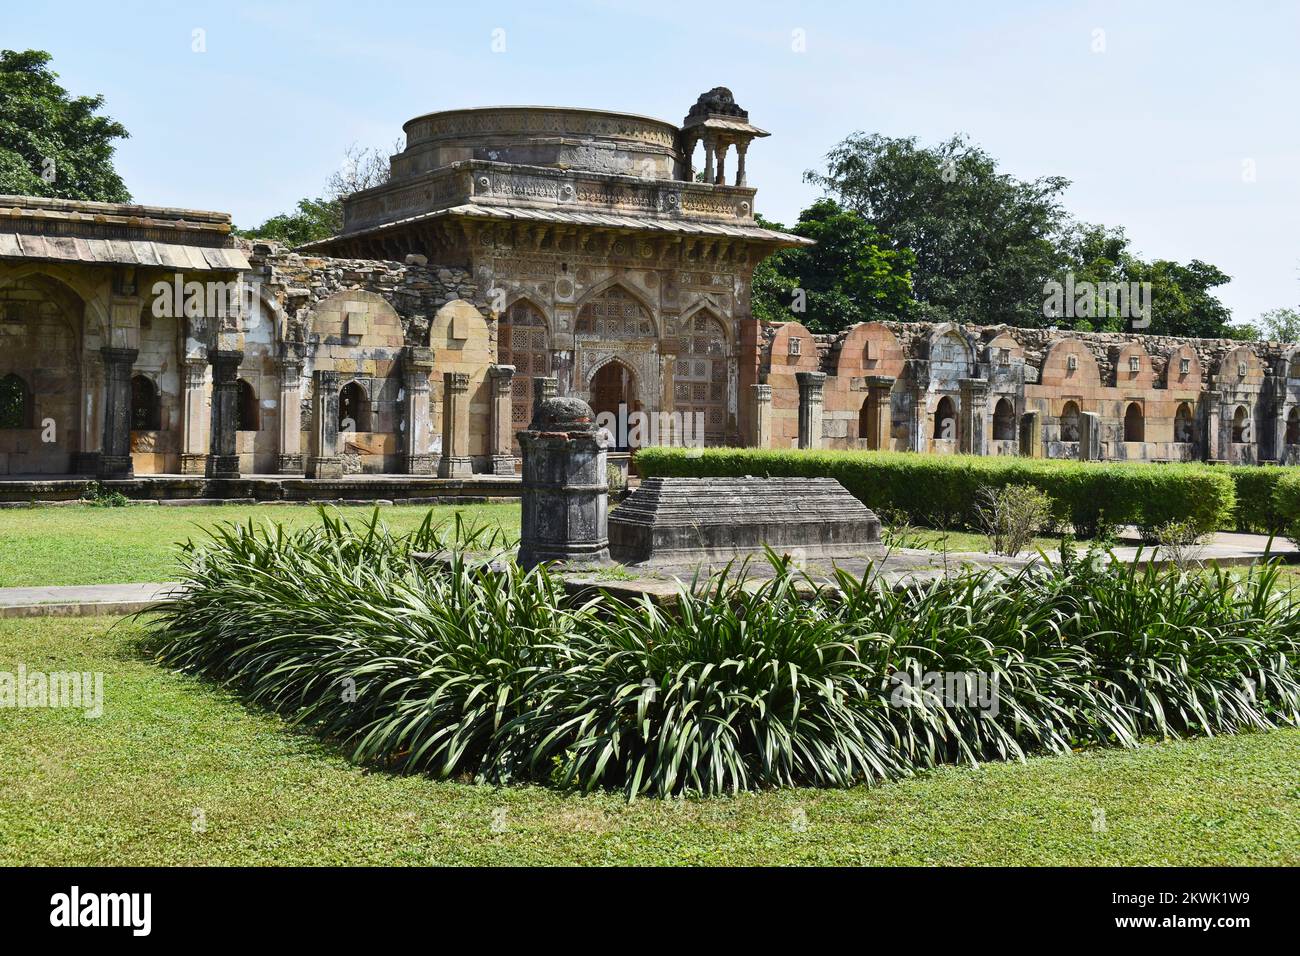 Jami Masjid, Sufi Grave and courtyard with intricate carvings in stone, an Islamic monuments was built by Sultan Mahmud Begada in 1509, Champaner-Pava Stock Photo